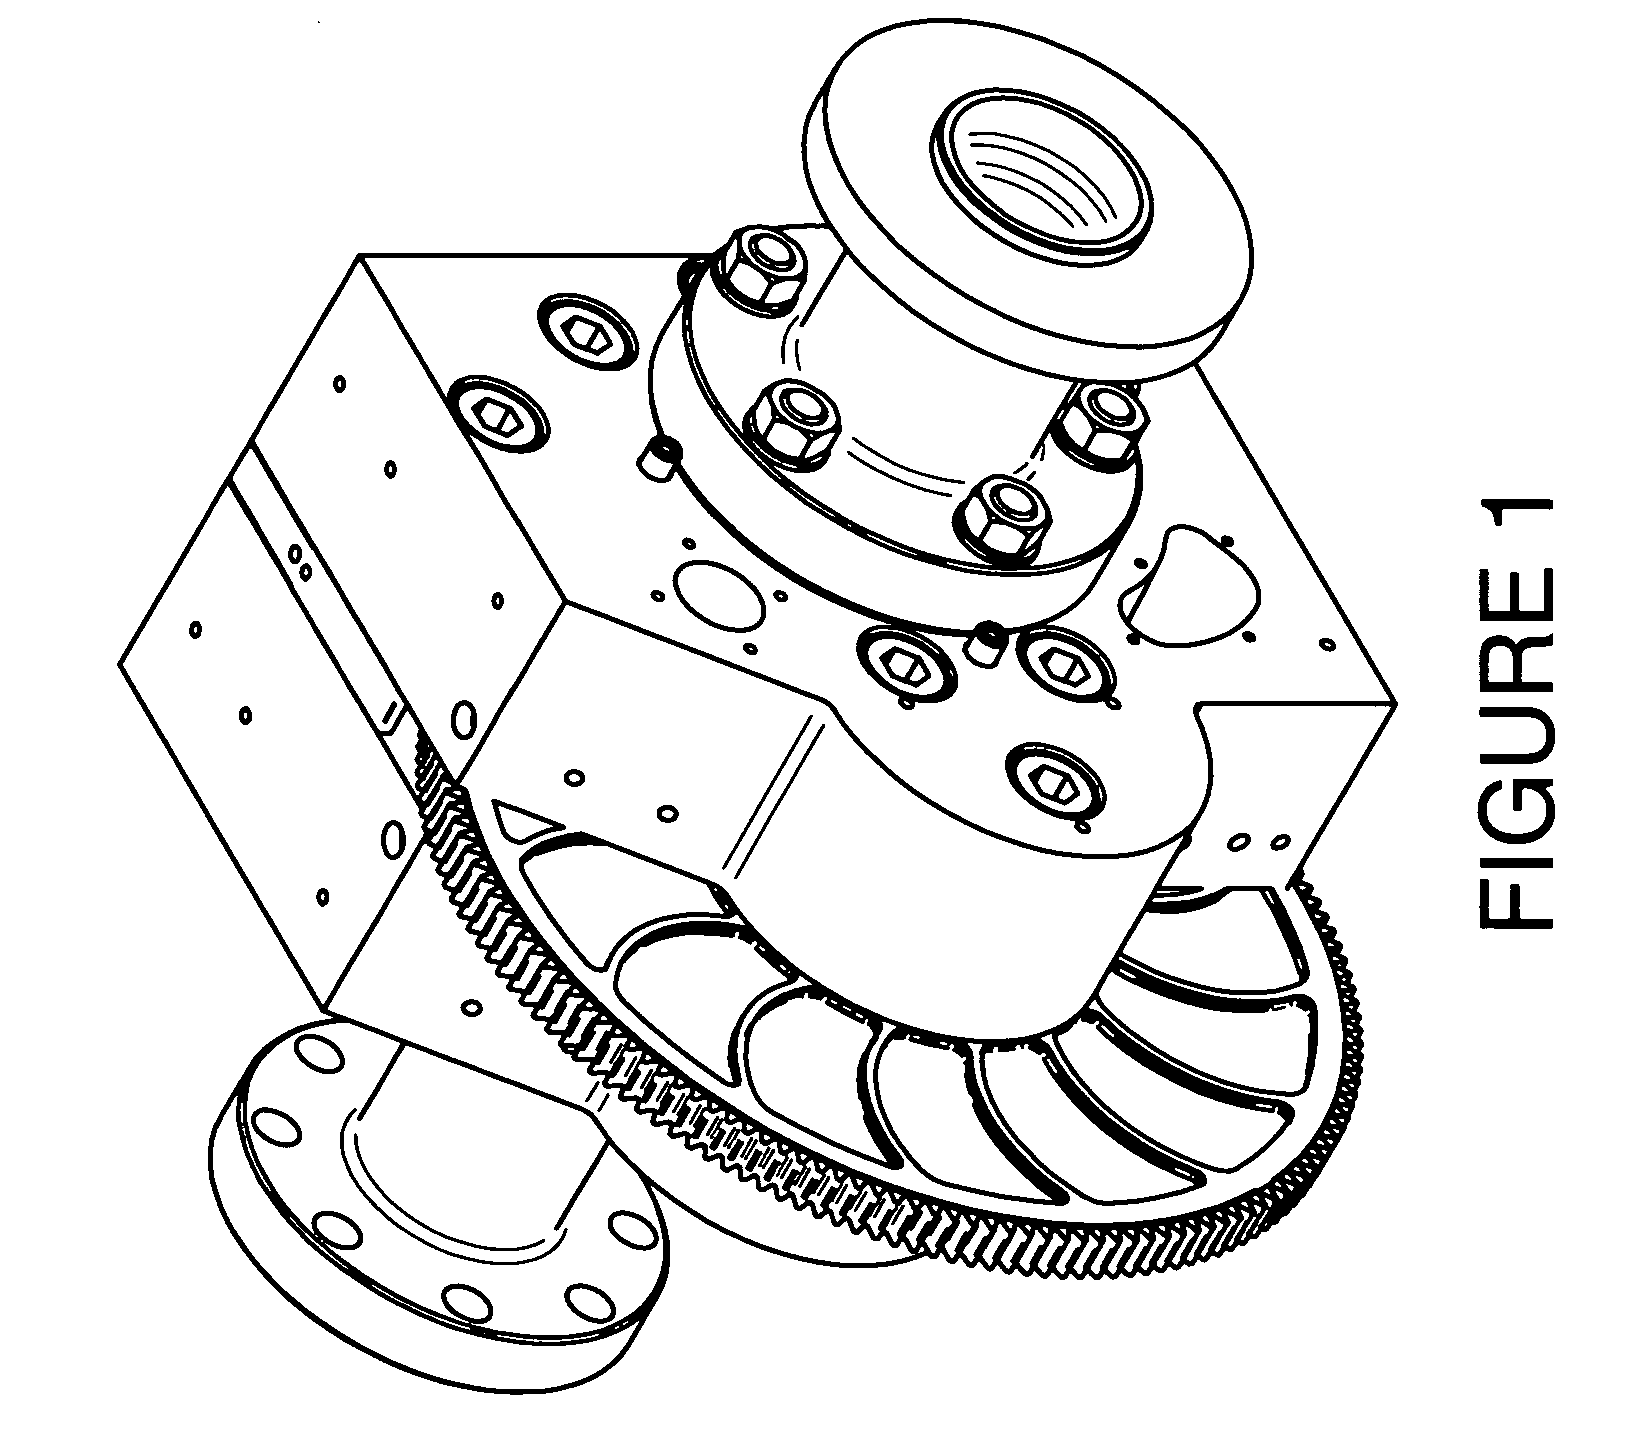 Single disc dual flow rotary filter